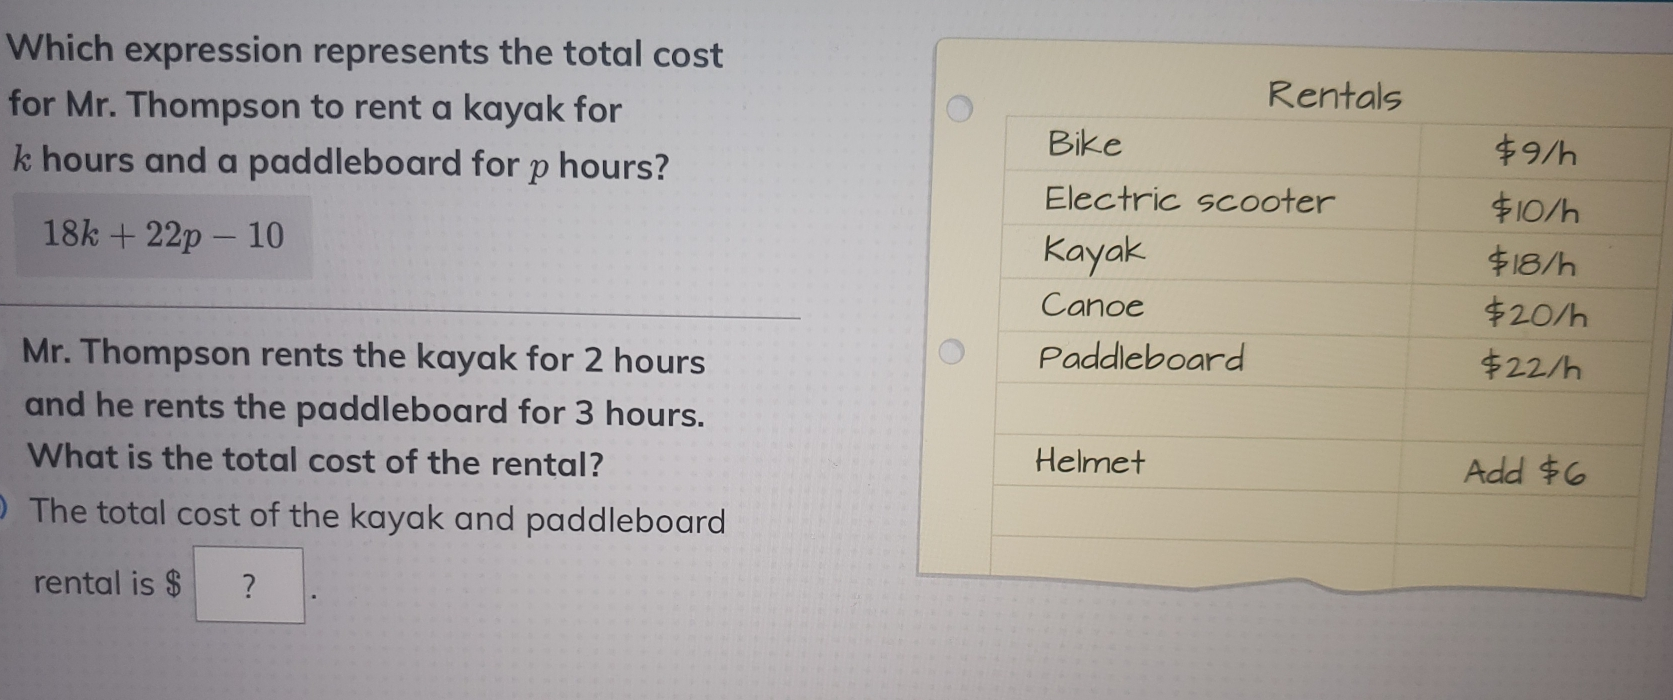 Which expression represents the total cost for Mr. Thompson to rent a kayak for k hours and a paddleboard for p hours? 18k+22p-10 Mr. Thompson rents the kayak for 2 hours and he rents the paddleboard for 3 hours. What is the total cost of the rental? The total cost of the kayak and paddleboard rental is $ ？